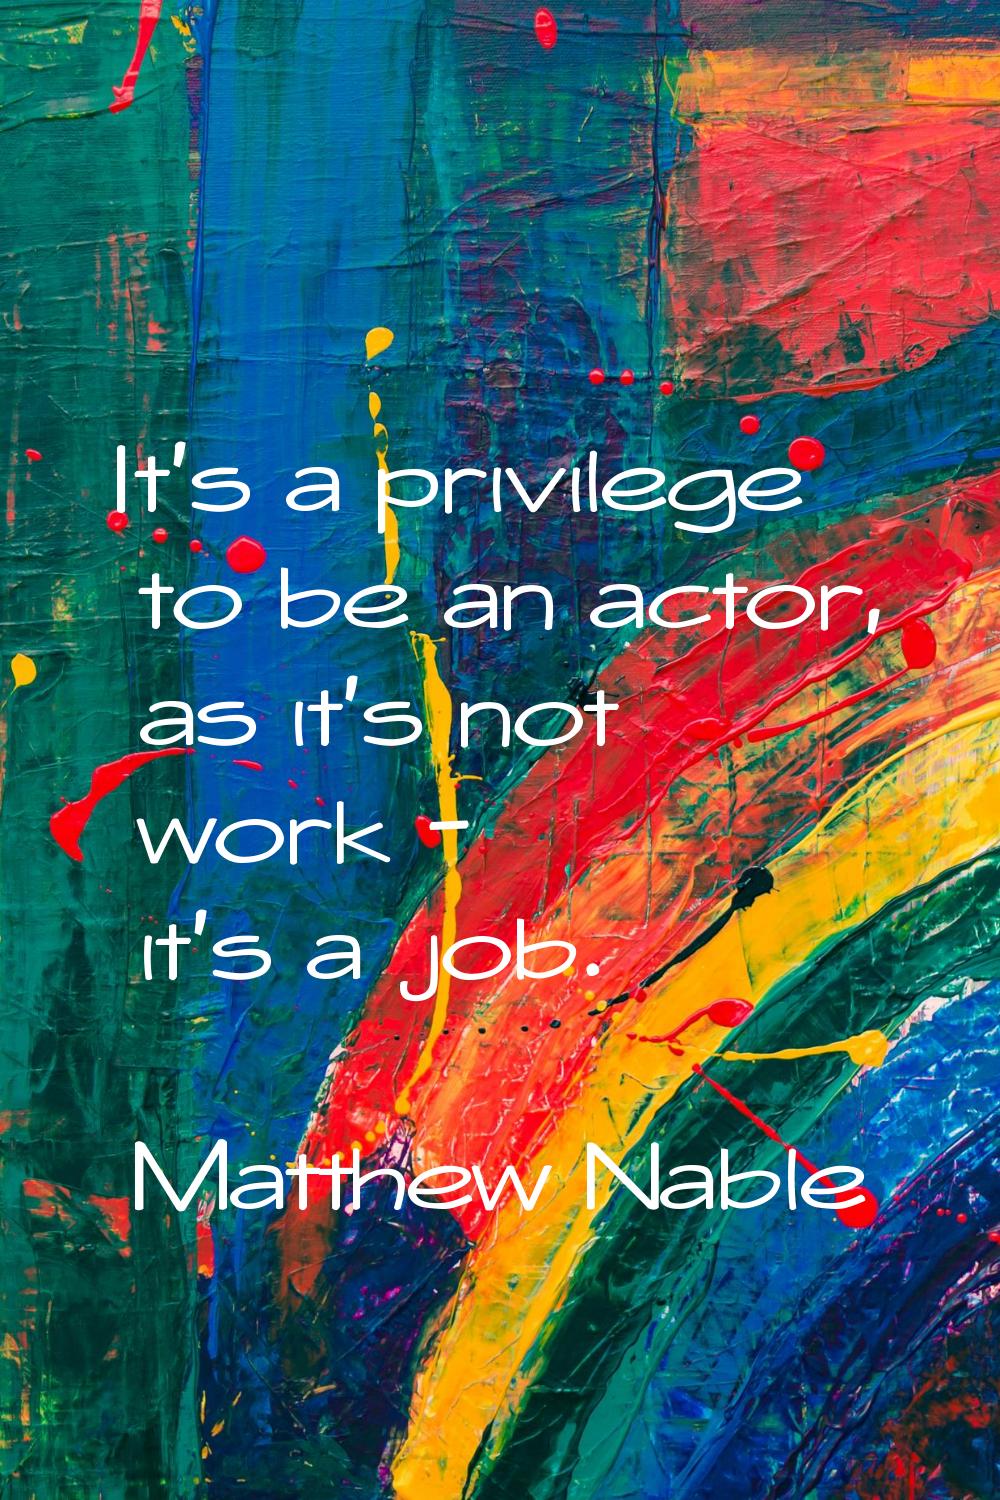 It's a privilege to be an actor, as it's not work - it's a job.